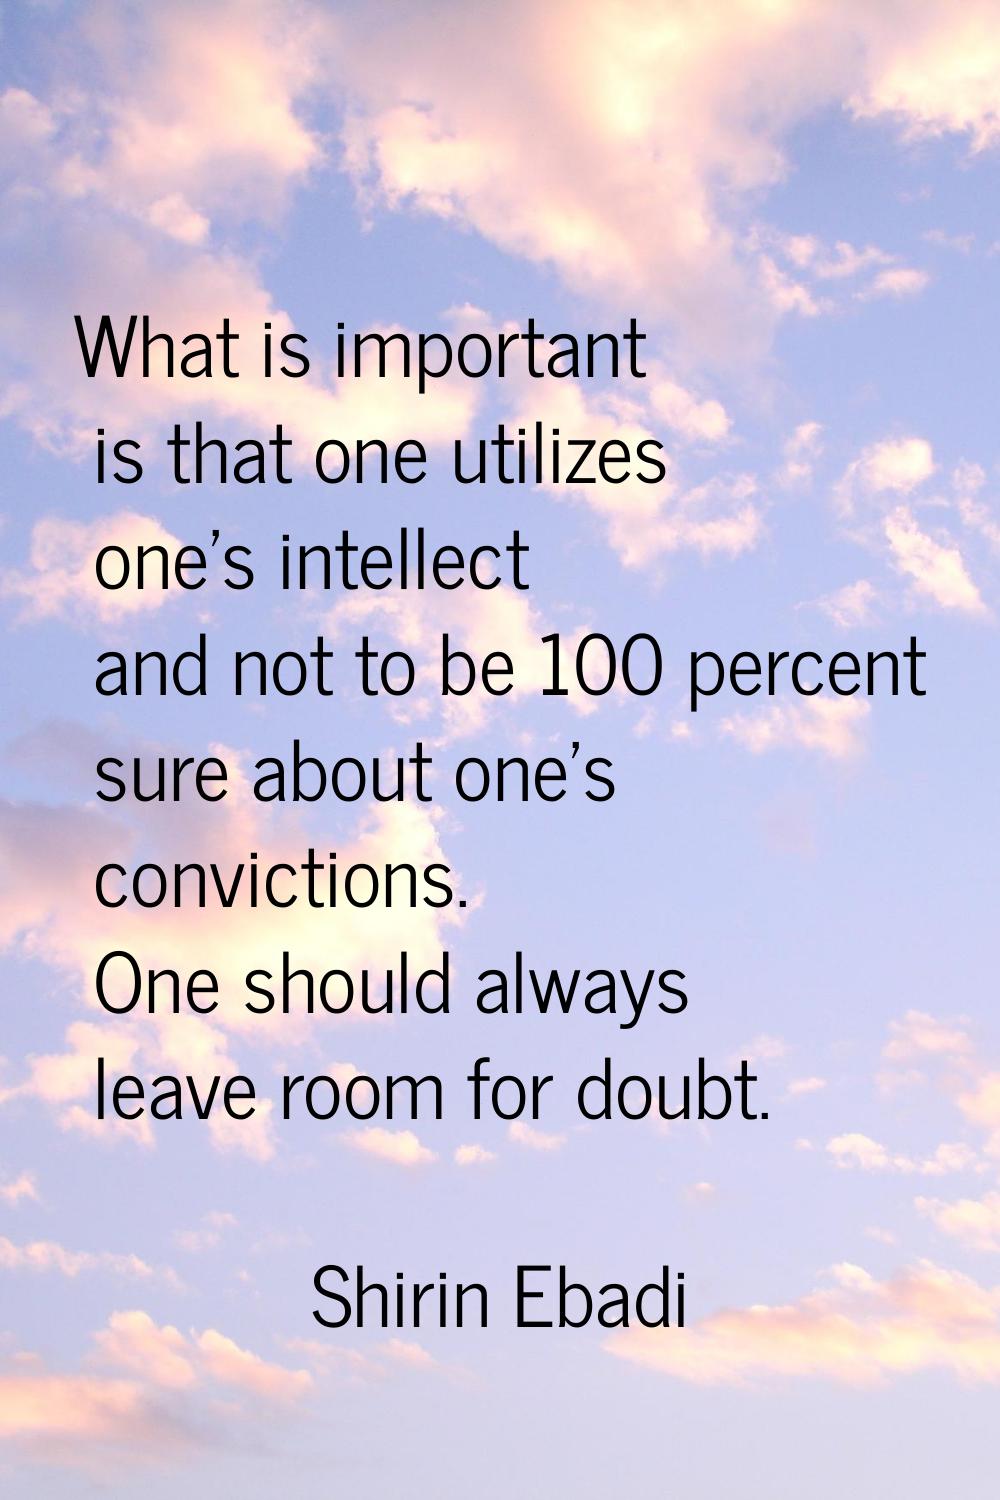 What is important is that one utilizes one's intellect and not to be 100 percent sure about one's c